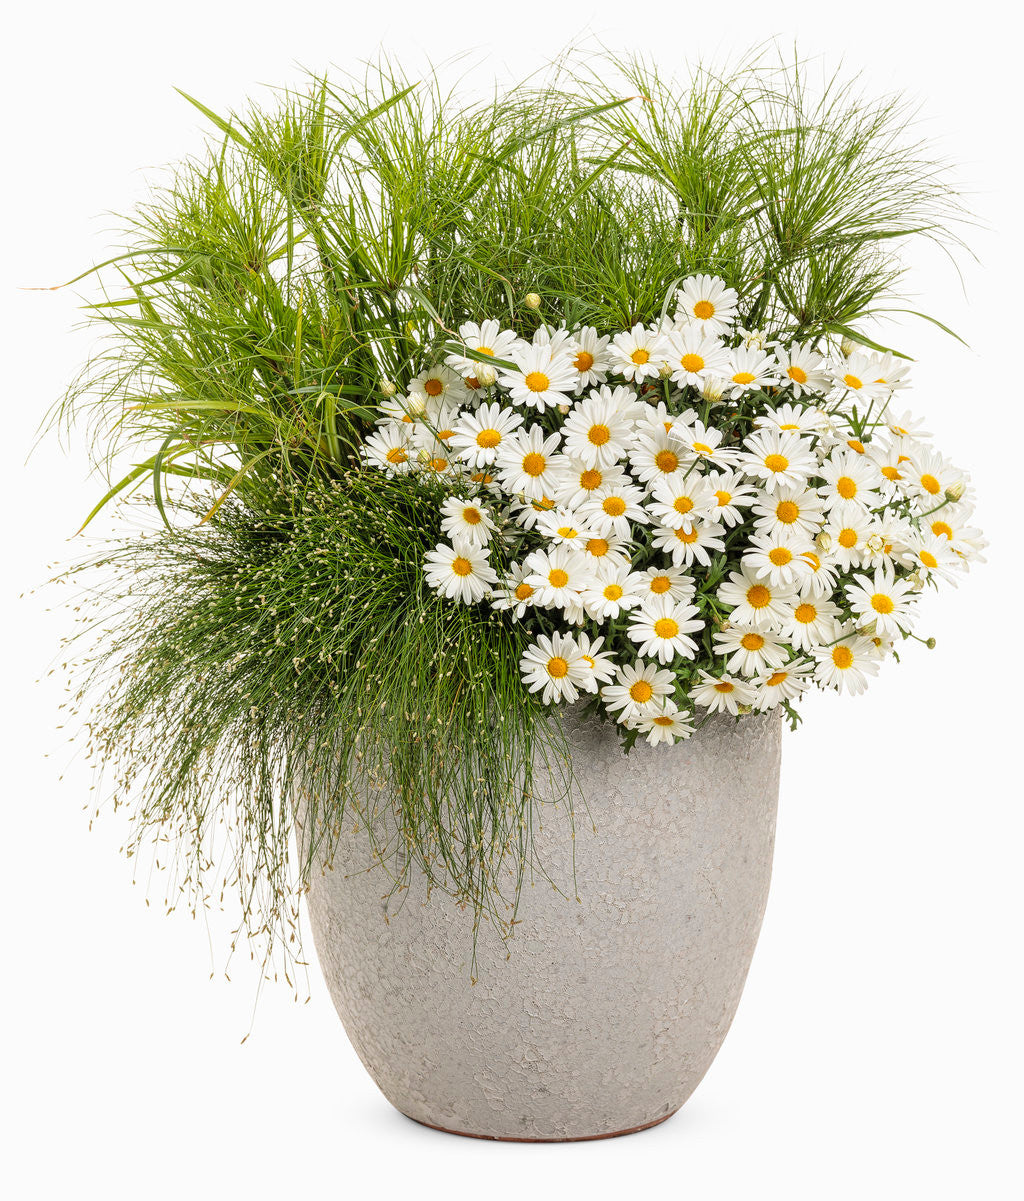 Argyranthemum frutescens 'Pure White Butterfly®' combination